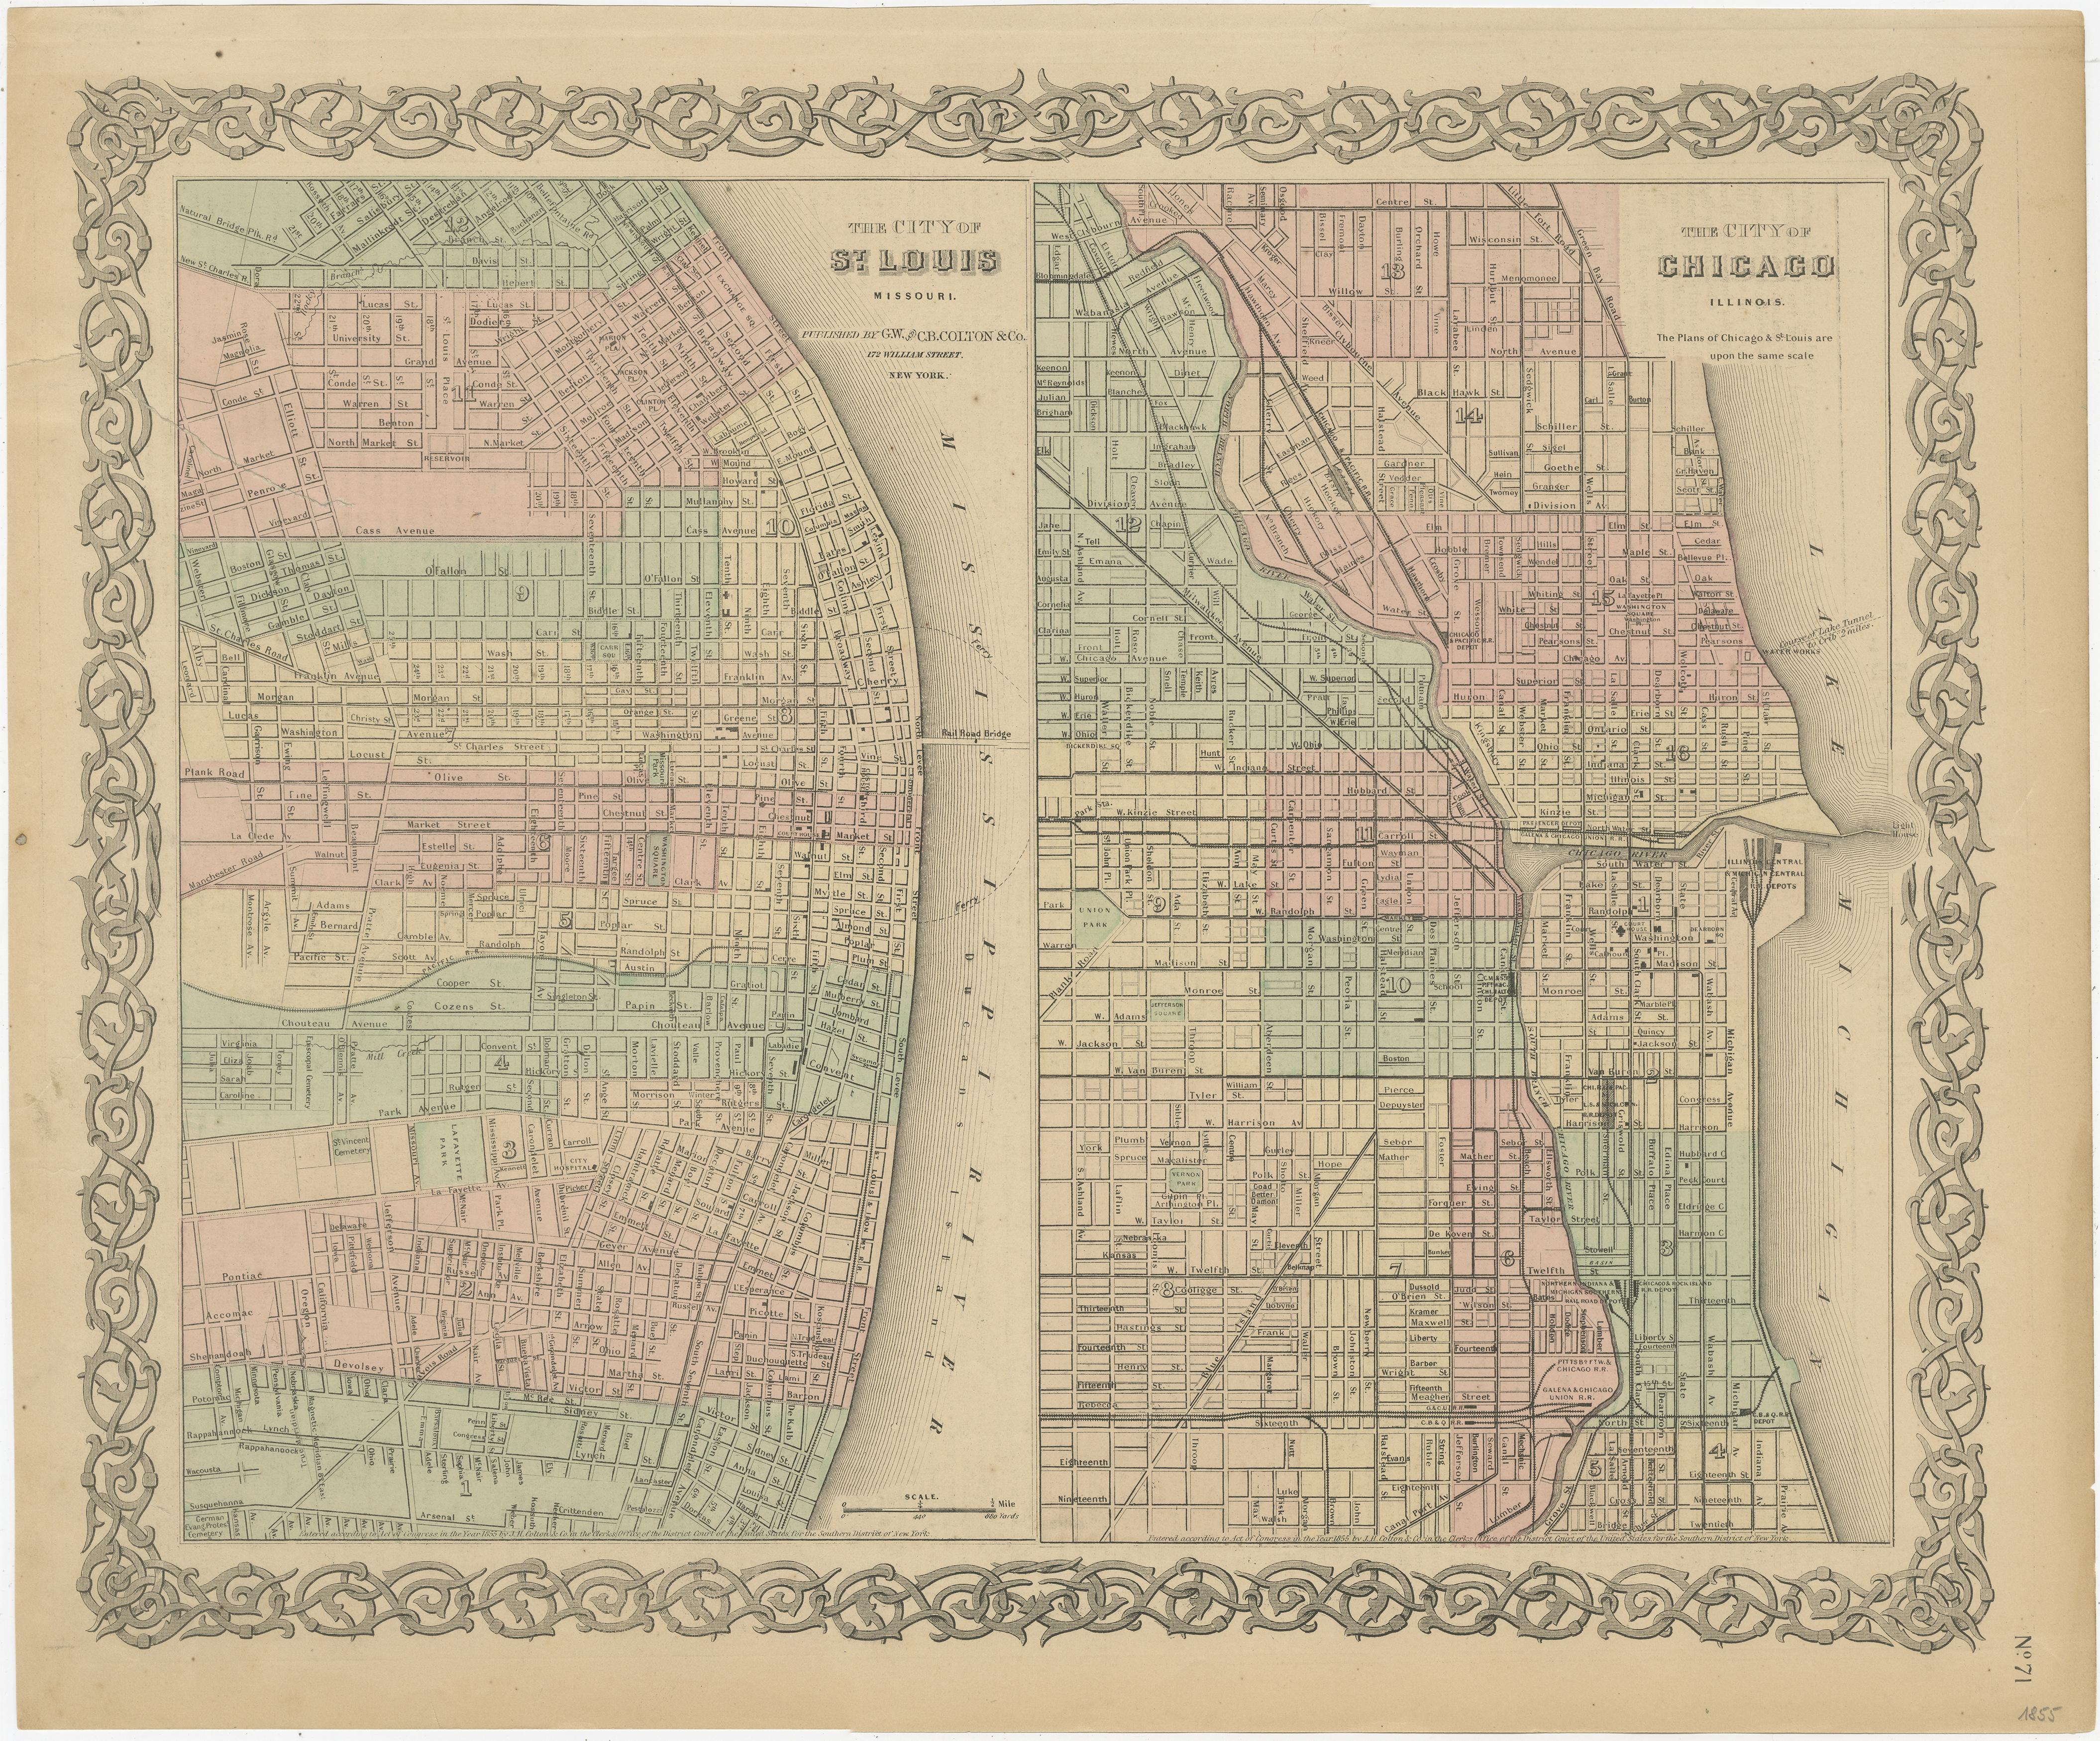 Antique map titled 'The City of St. Louis Missouri - The City of Chicago Illinois'. Dual map on single page showing St. Louis and Chicago. Finely produced lithograph that was hand colored at the time of publication. This map originates from